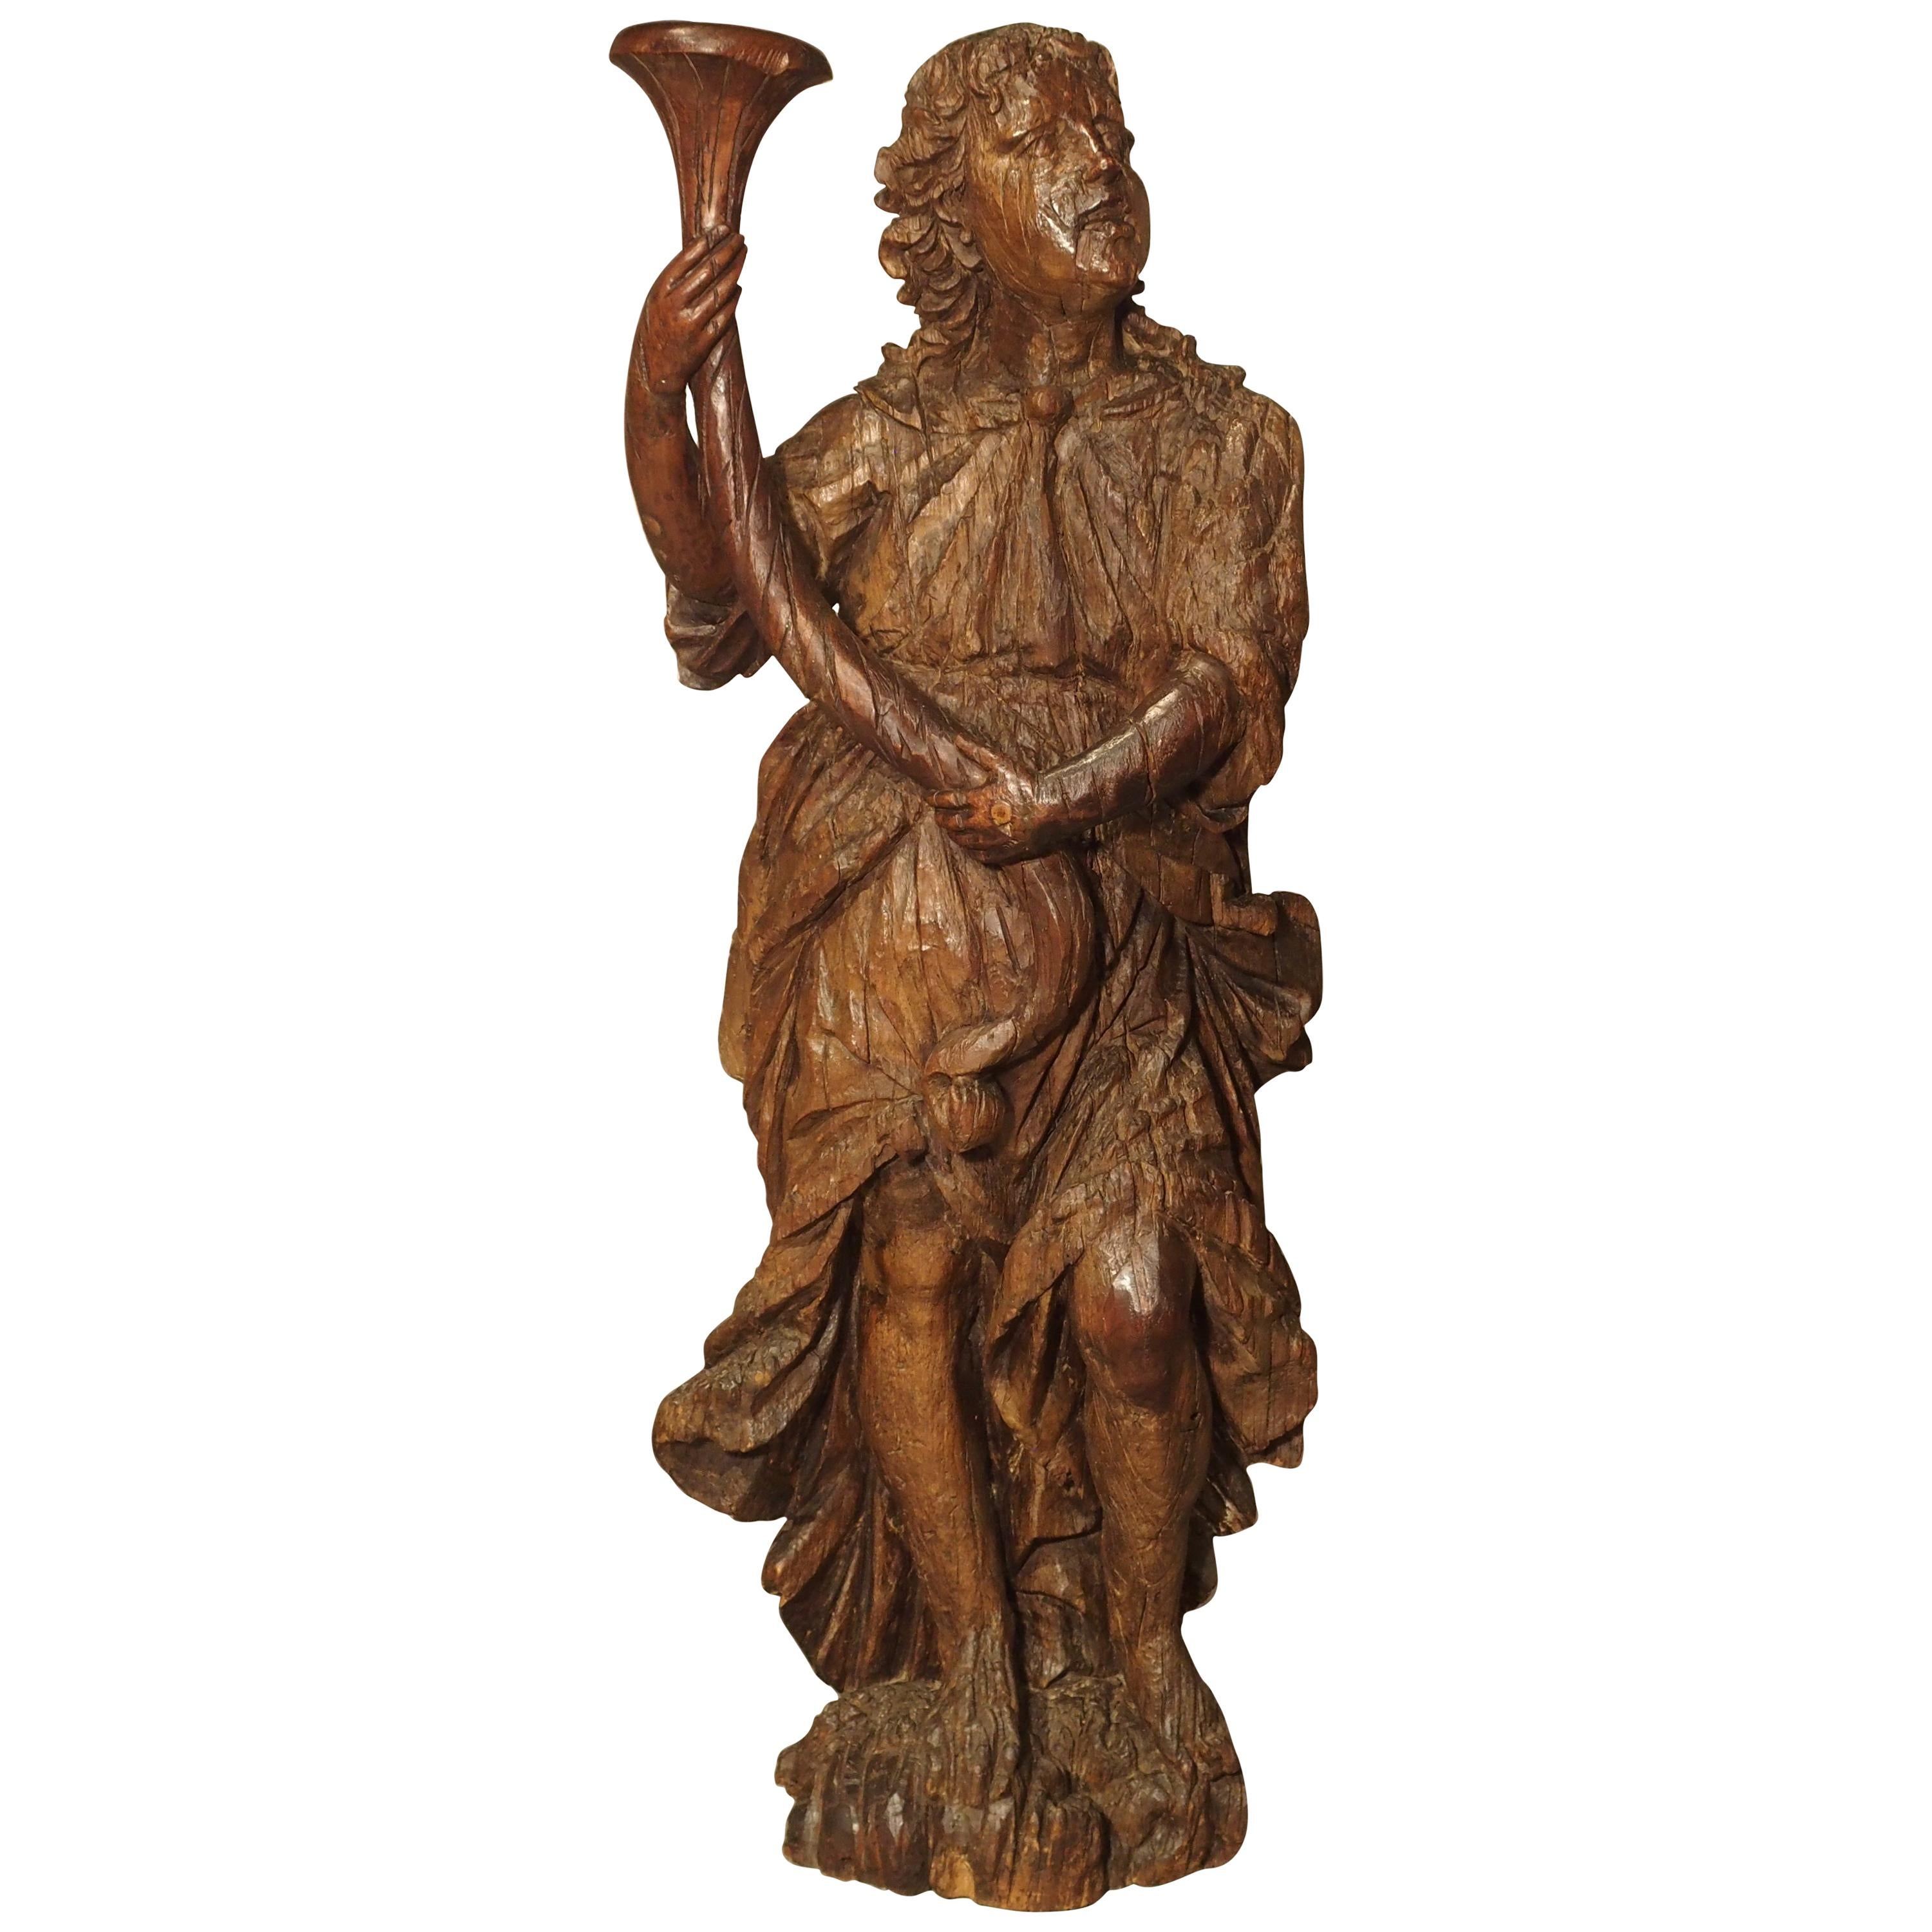 Circa 1650 Carved Hardwood Cornucopia Statue and Candle Holder from Italy For Sale